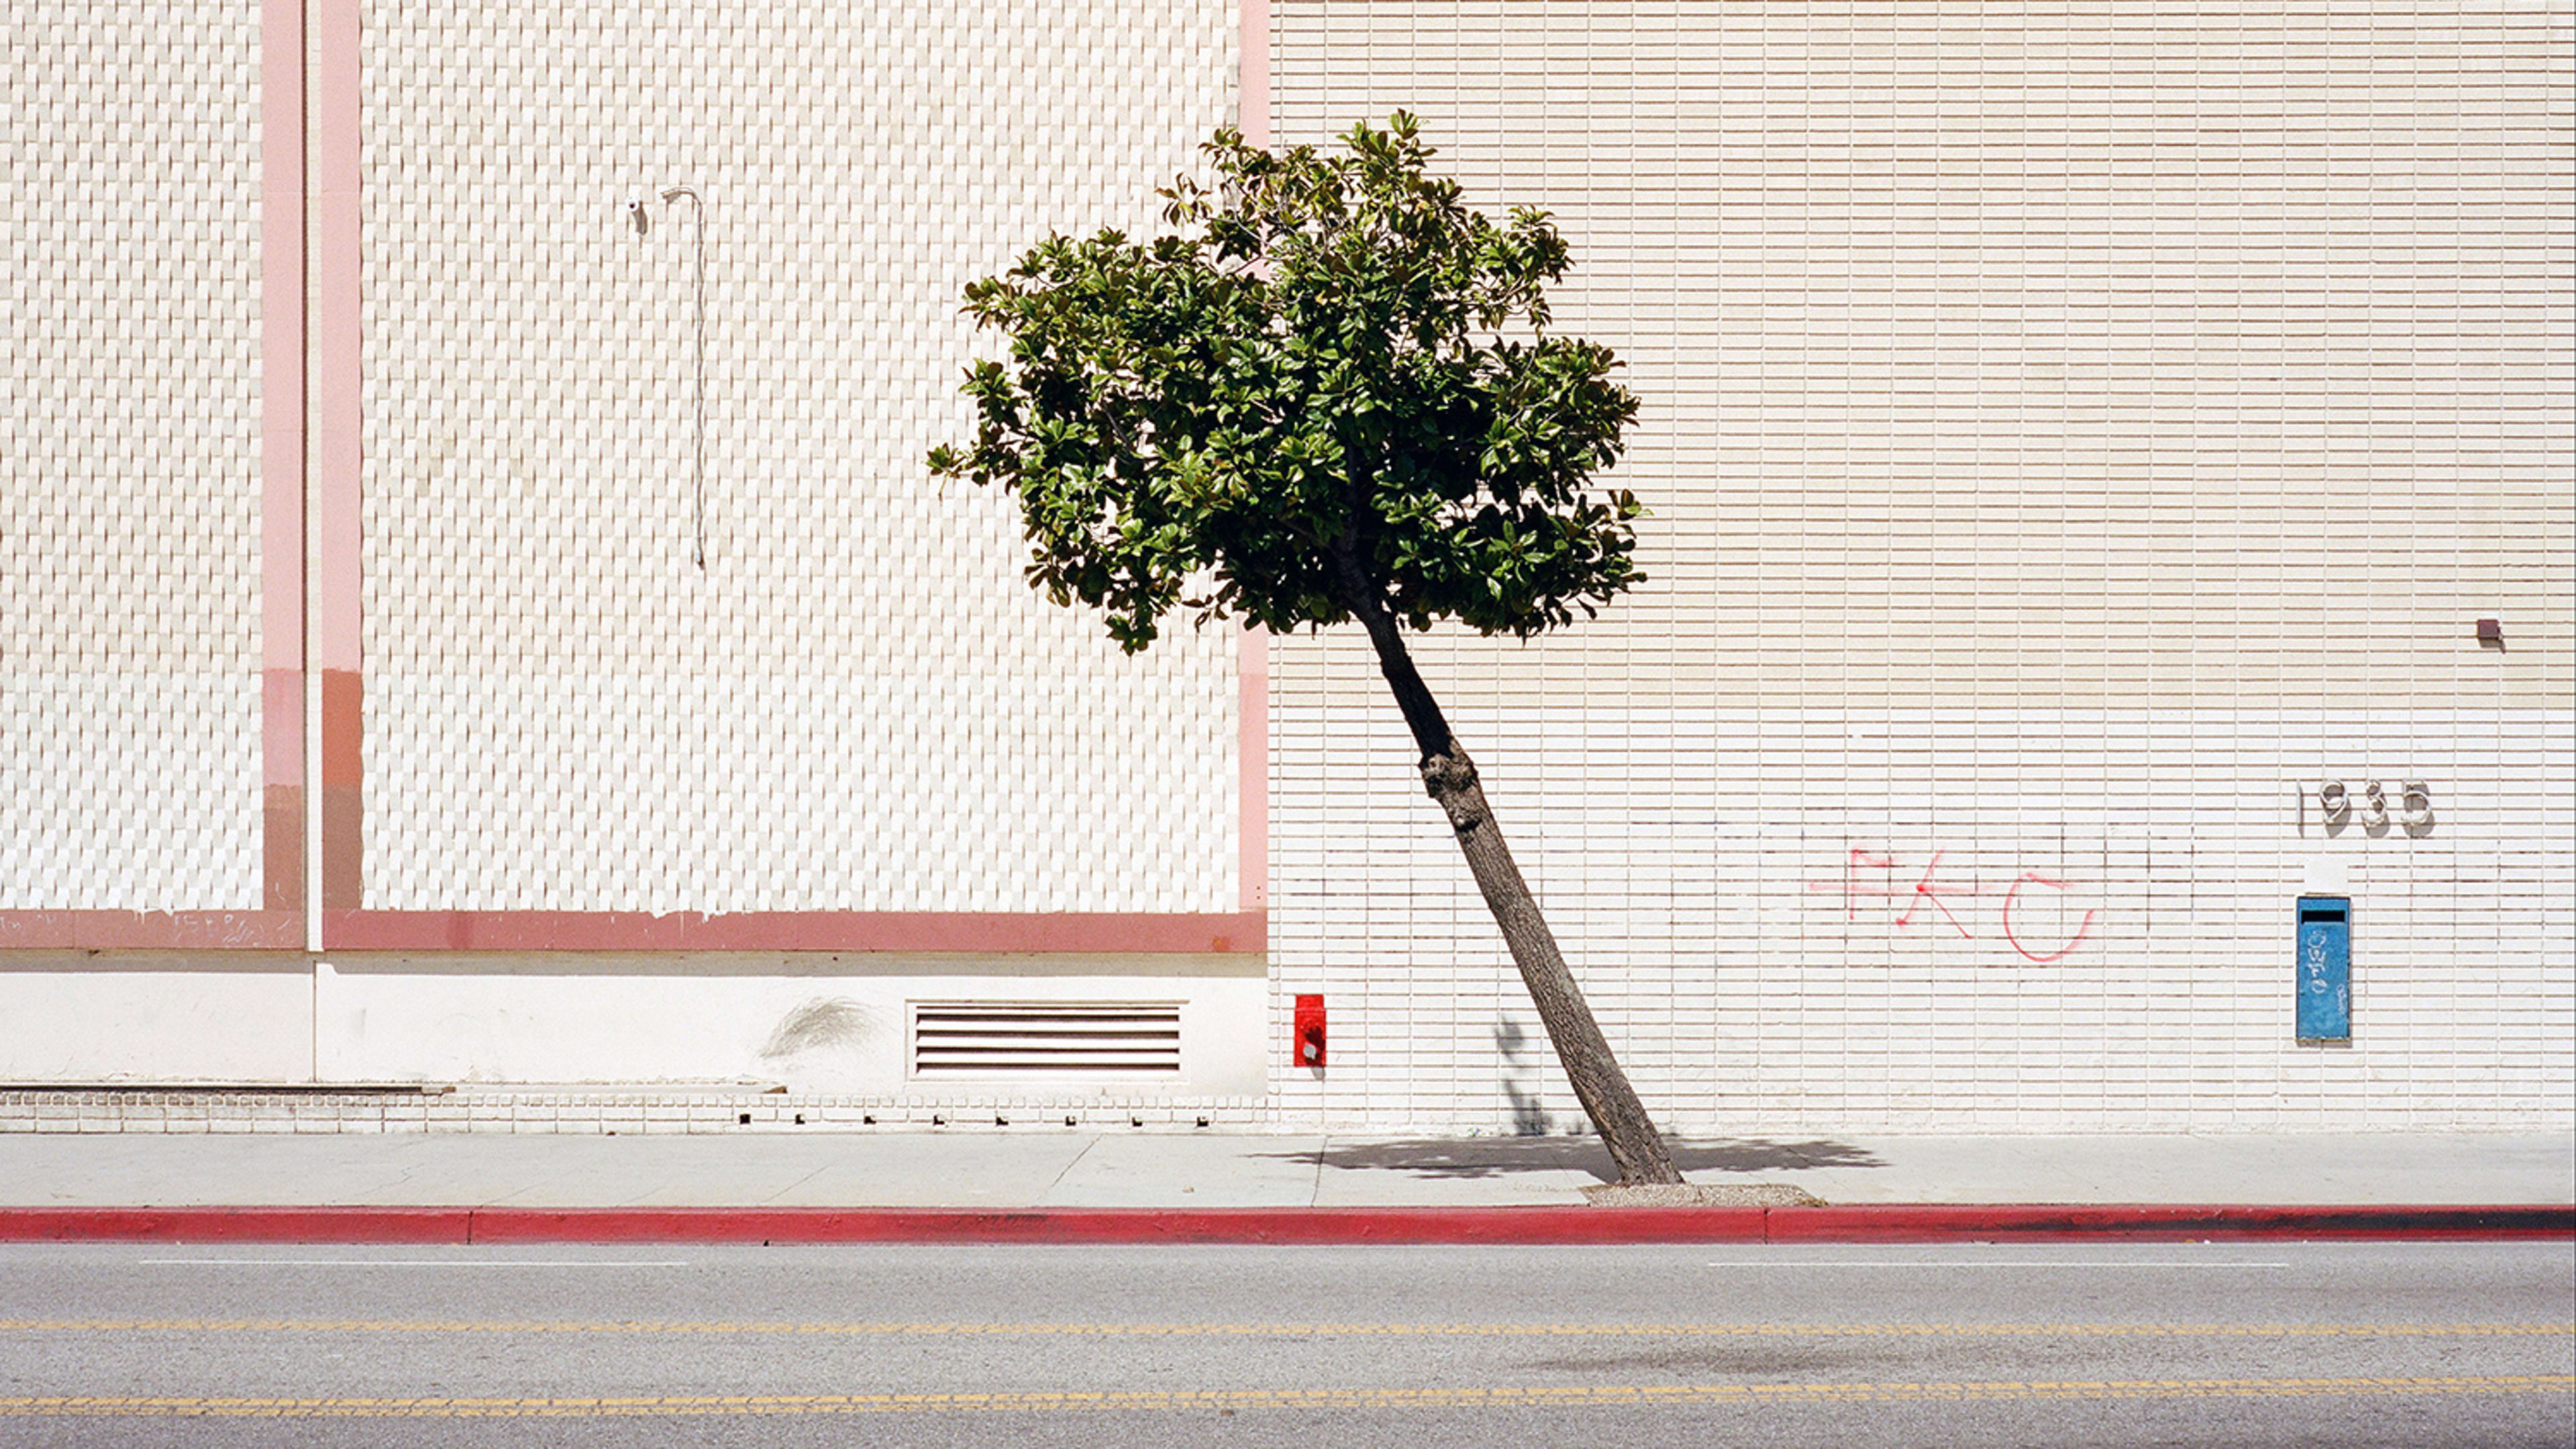 These photos of trees surviving in cities are hopeful and heartbreaking